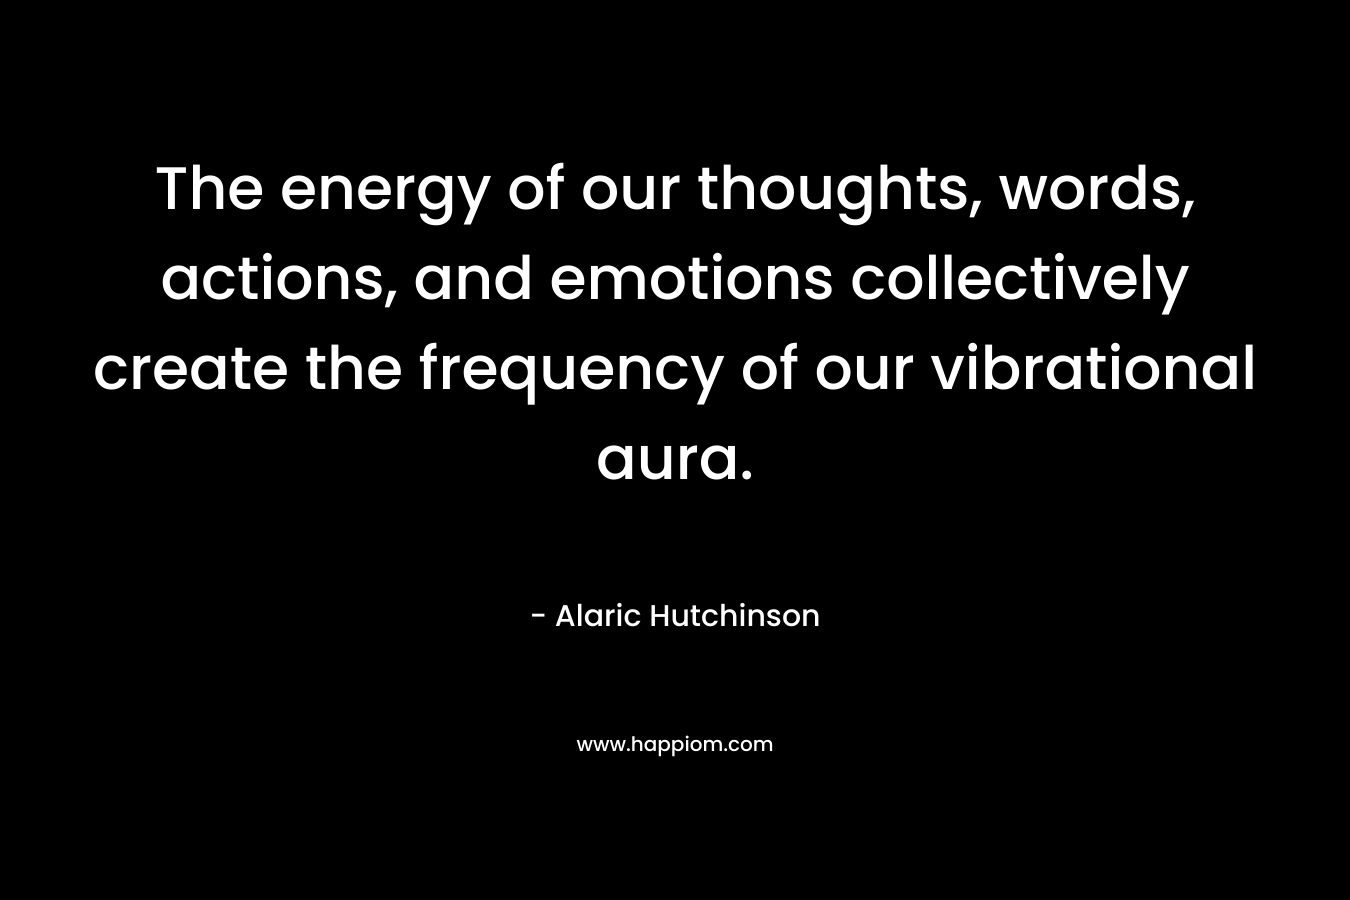 The energy of our thoughts, words, actions, and emotions collectively create the frequency of our vibrational aura. – Alaric Hutchinson